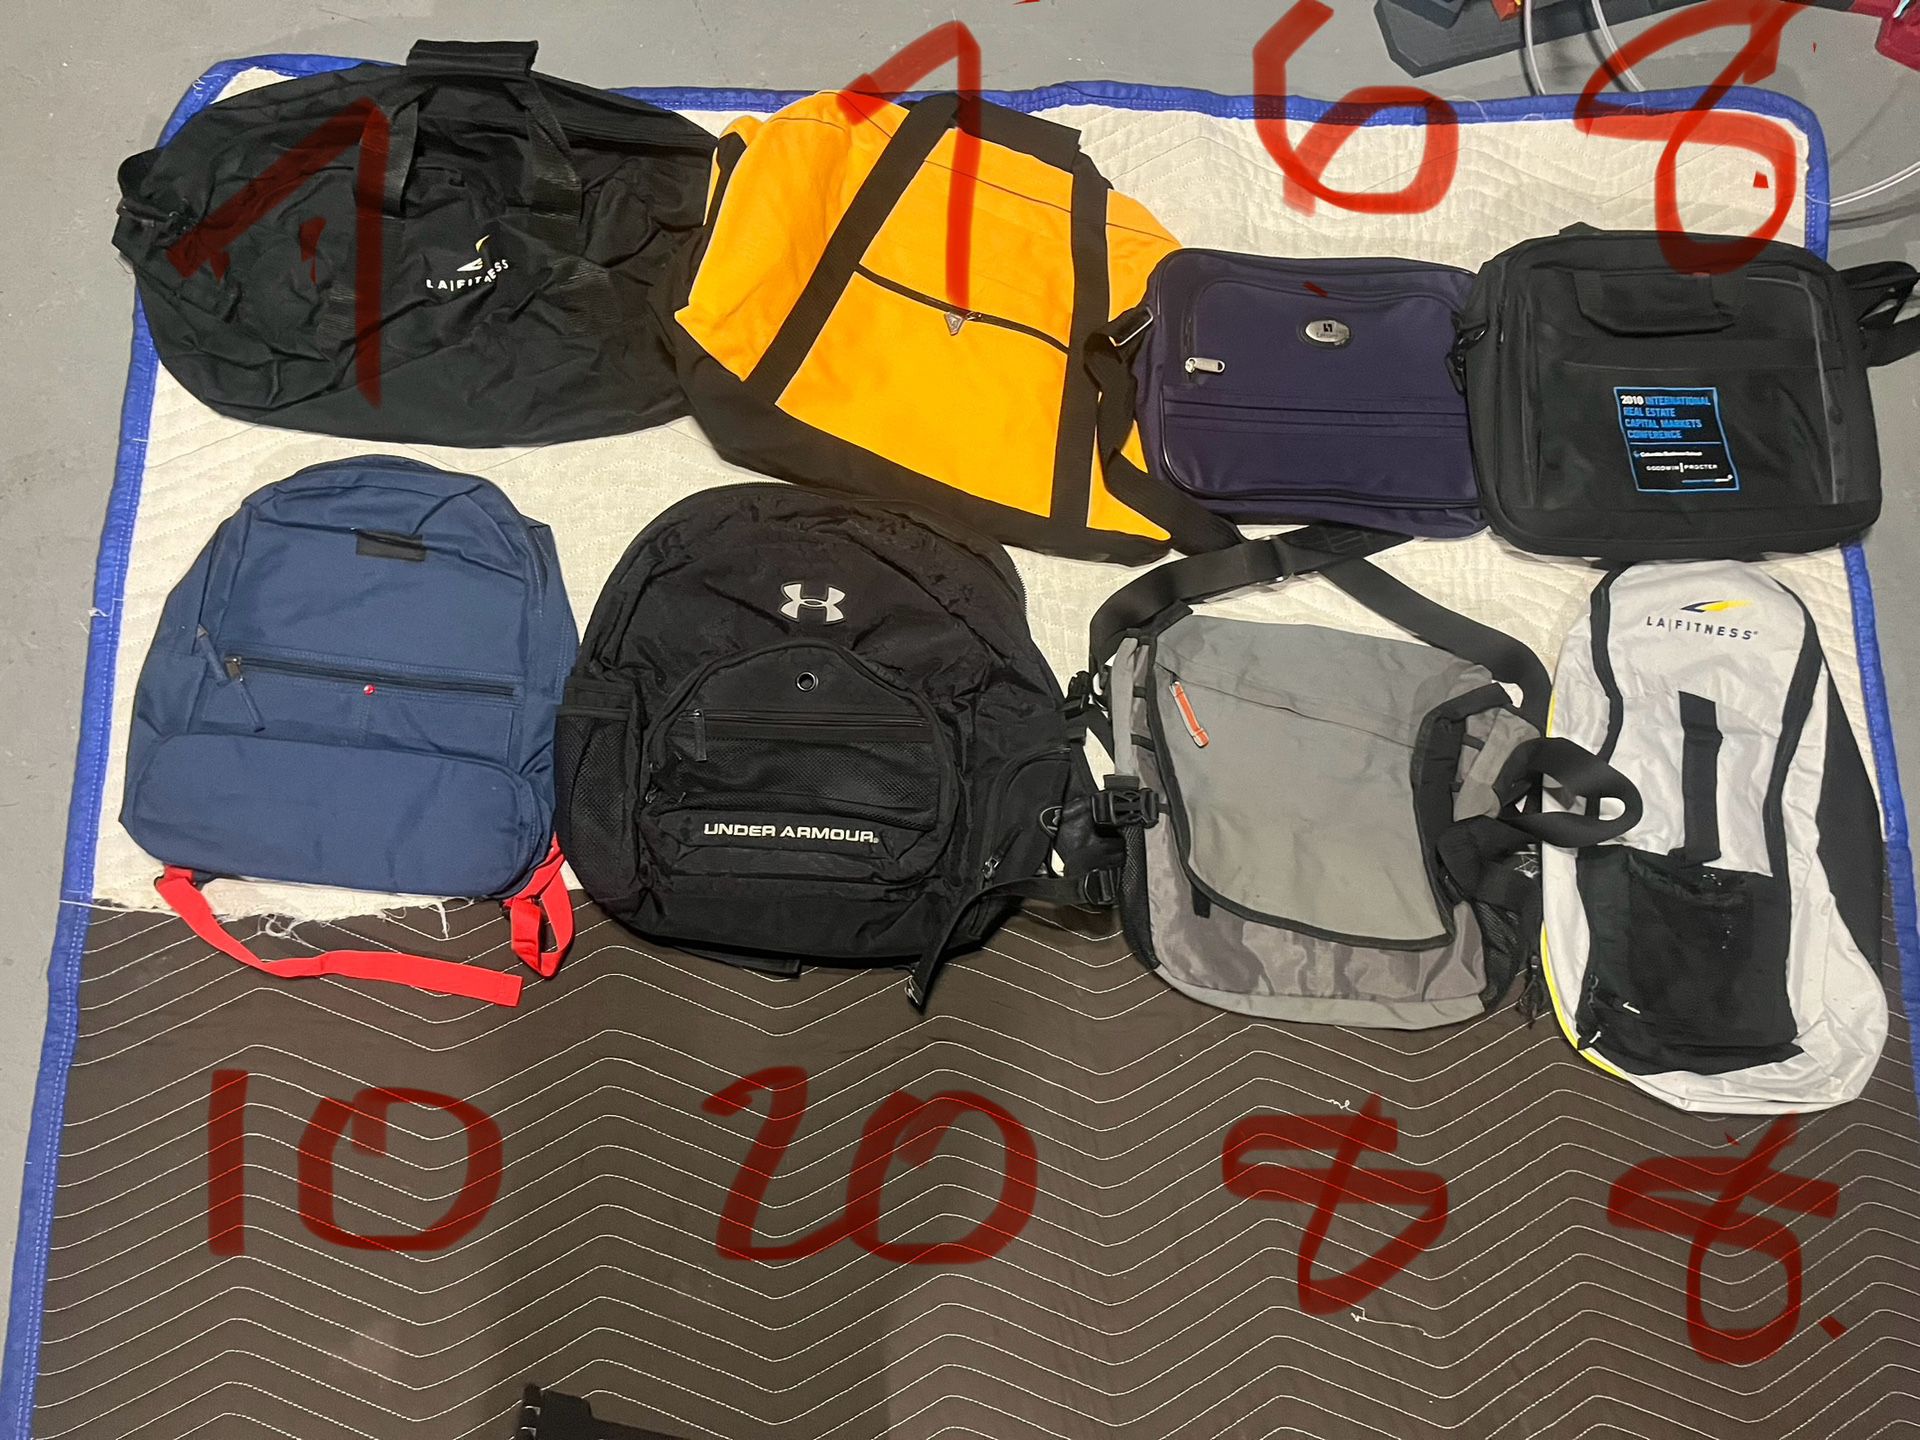 All 8 Bags For Sale